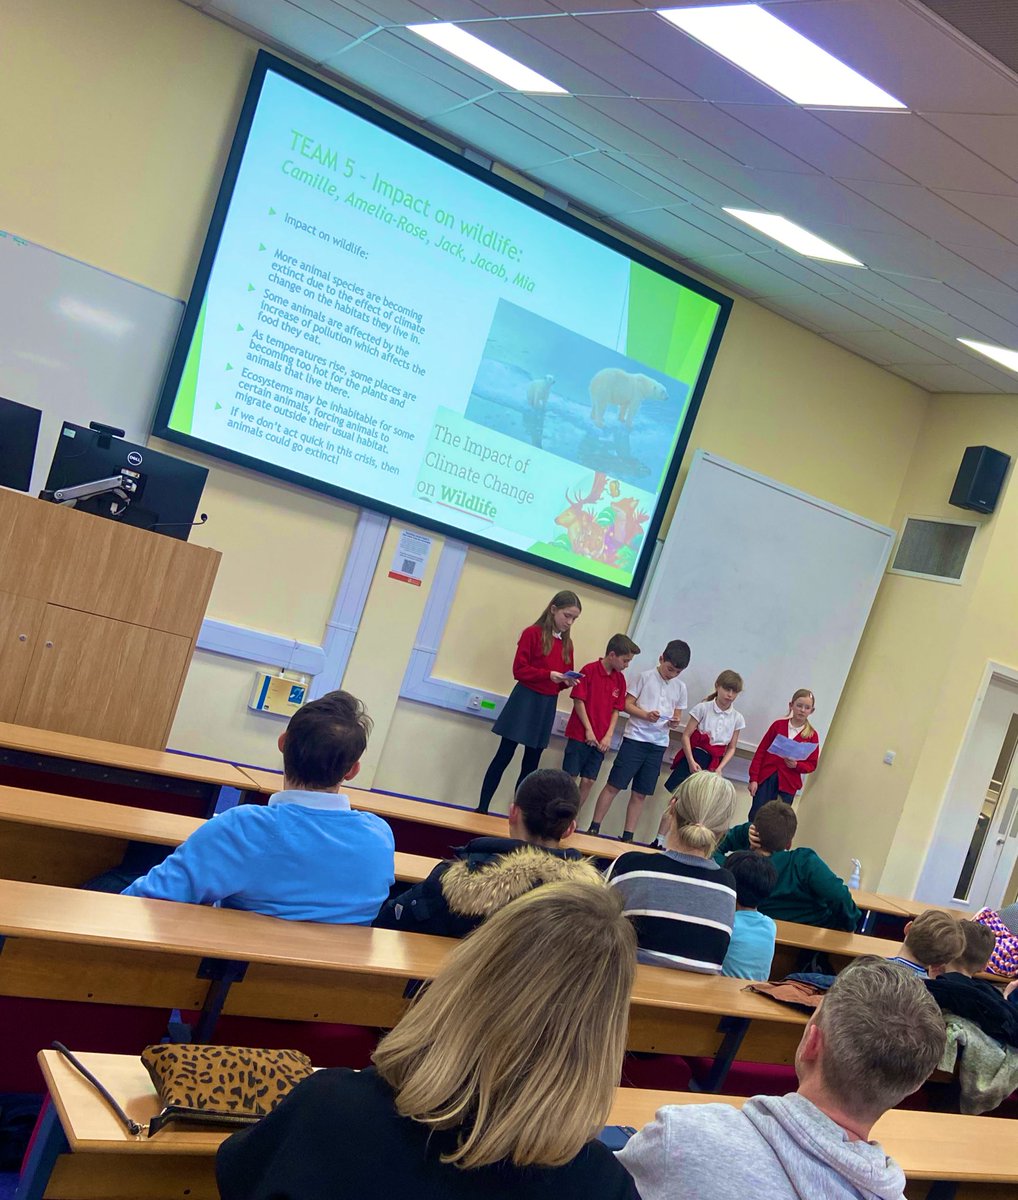 Wow TEAM Falcons - your presentations and movies about Sustainability at the @uochester were incredible! What a way to celebrate your learning and change the future #sustainability #primarygeography